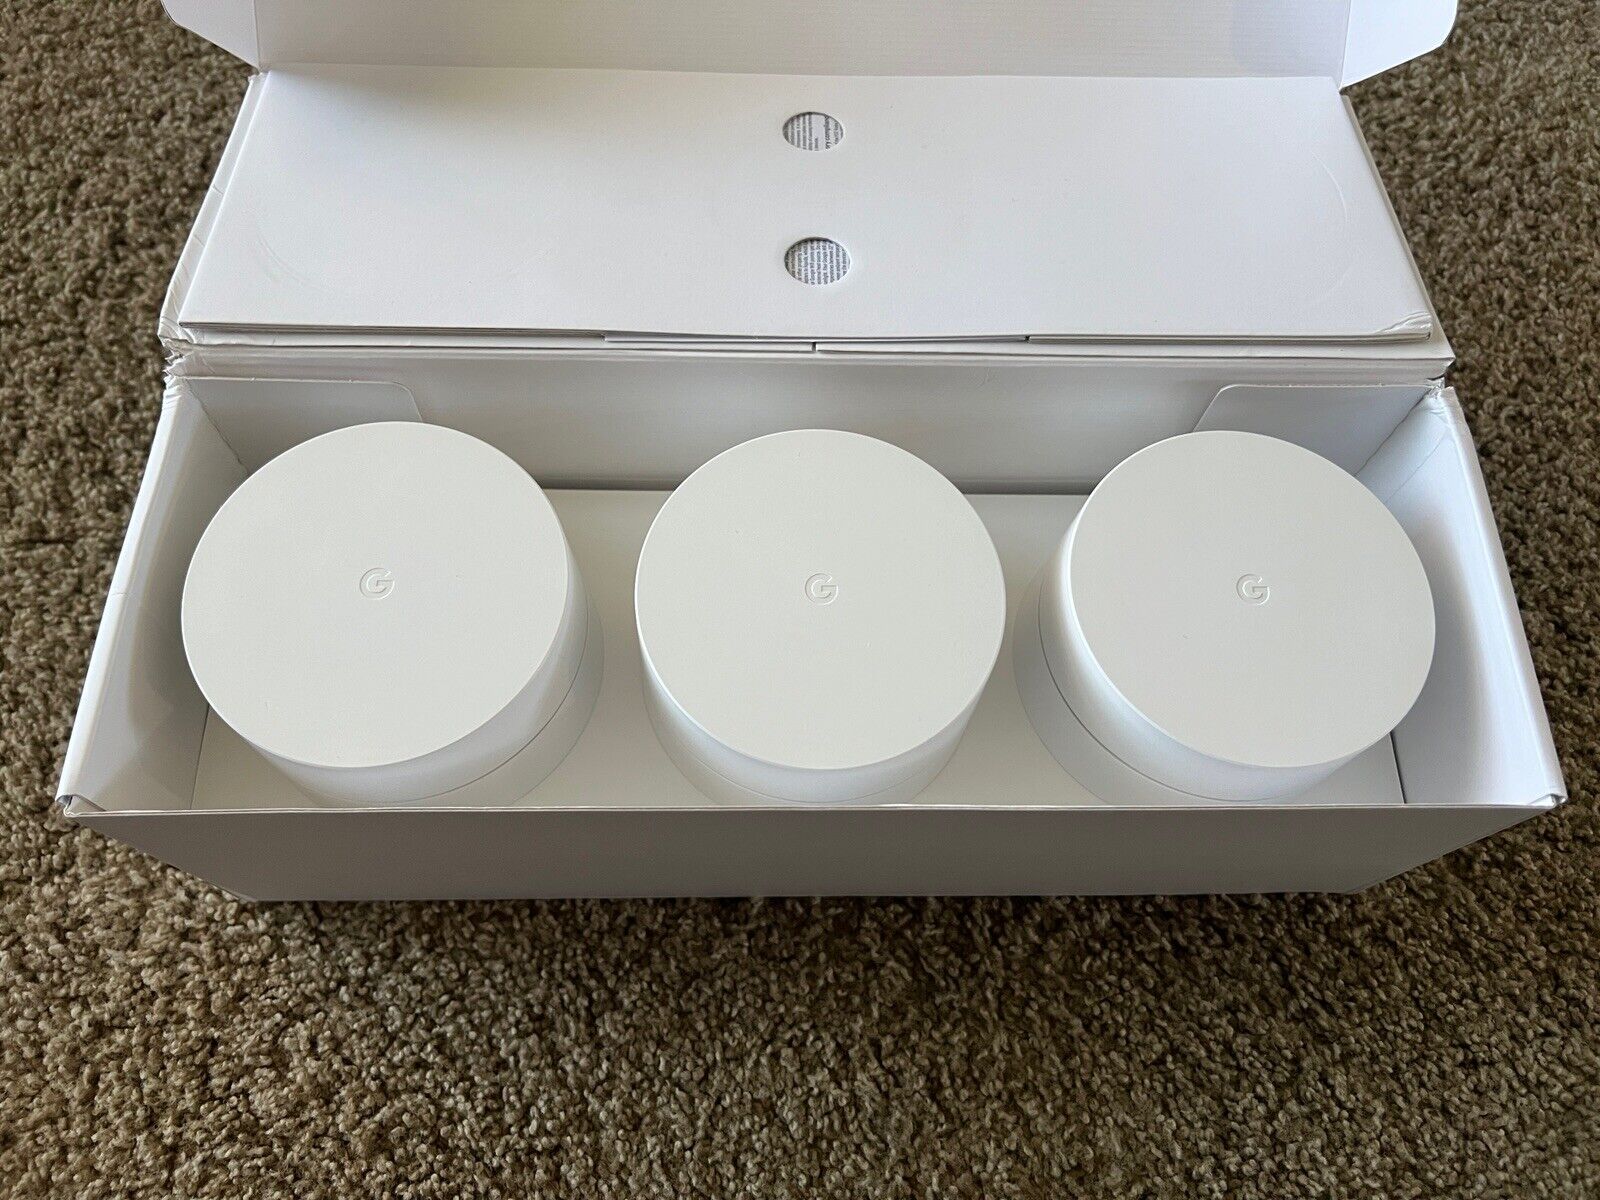 Google Wifi Mesh Router (AC1200) 3-pack - 2.4GHz/5GHz Dual-Band Mesh system